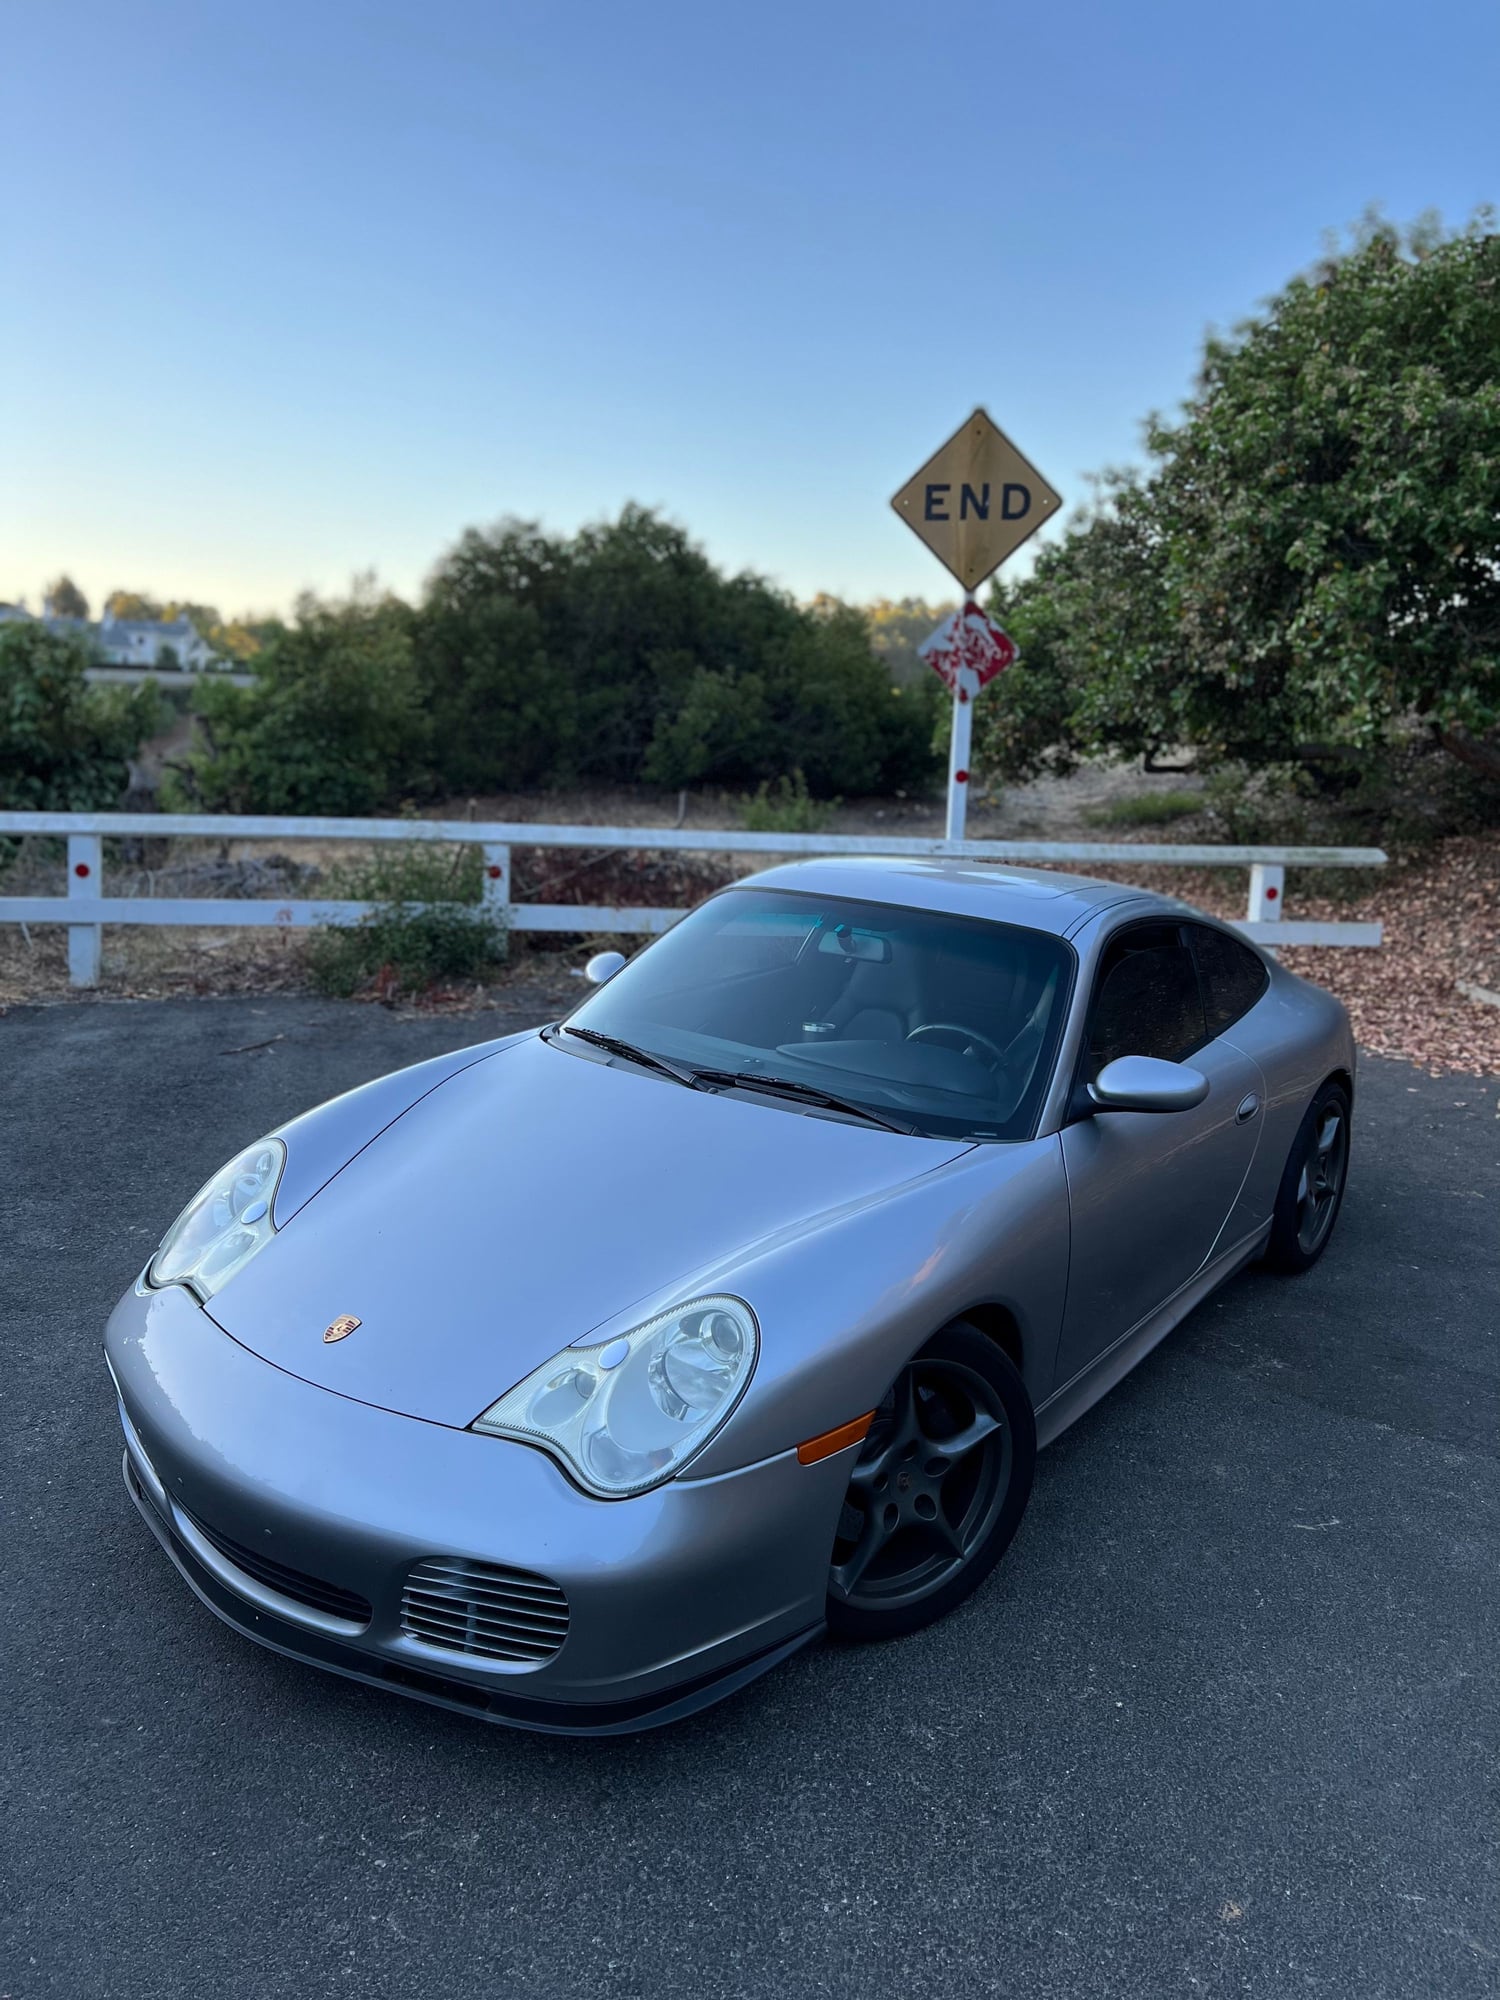 2004 Porsche 911 - 996 - 40th Anniversary X51 - Used - VIN WP0AA29904S621019 - 55,700 Miles - 6 cyl - 2WD - Manual - Coupe - Silver - West Hollywood, CA 90046, United States